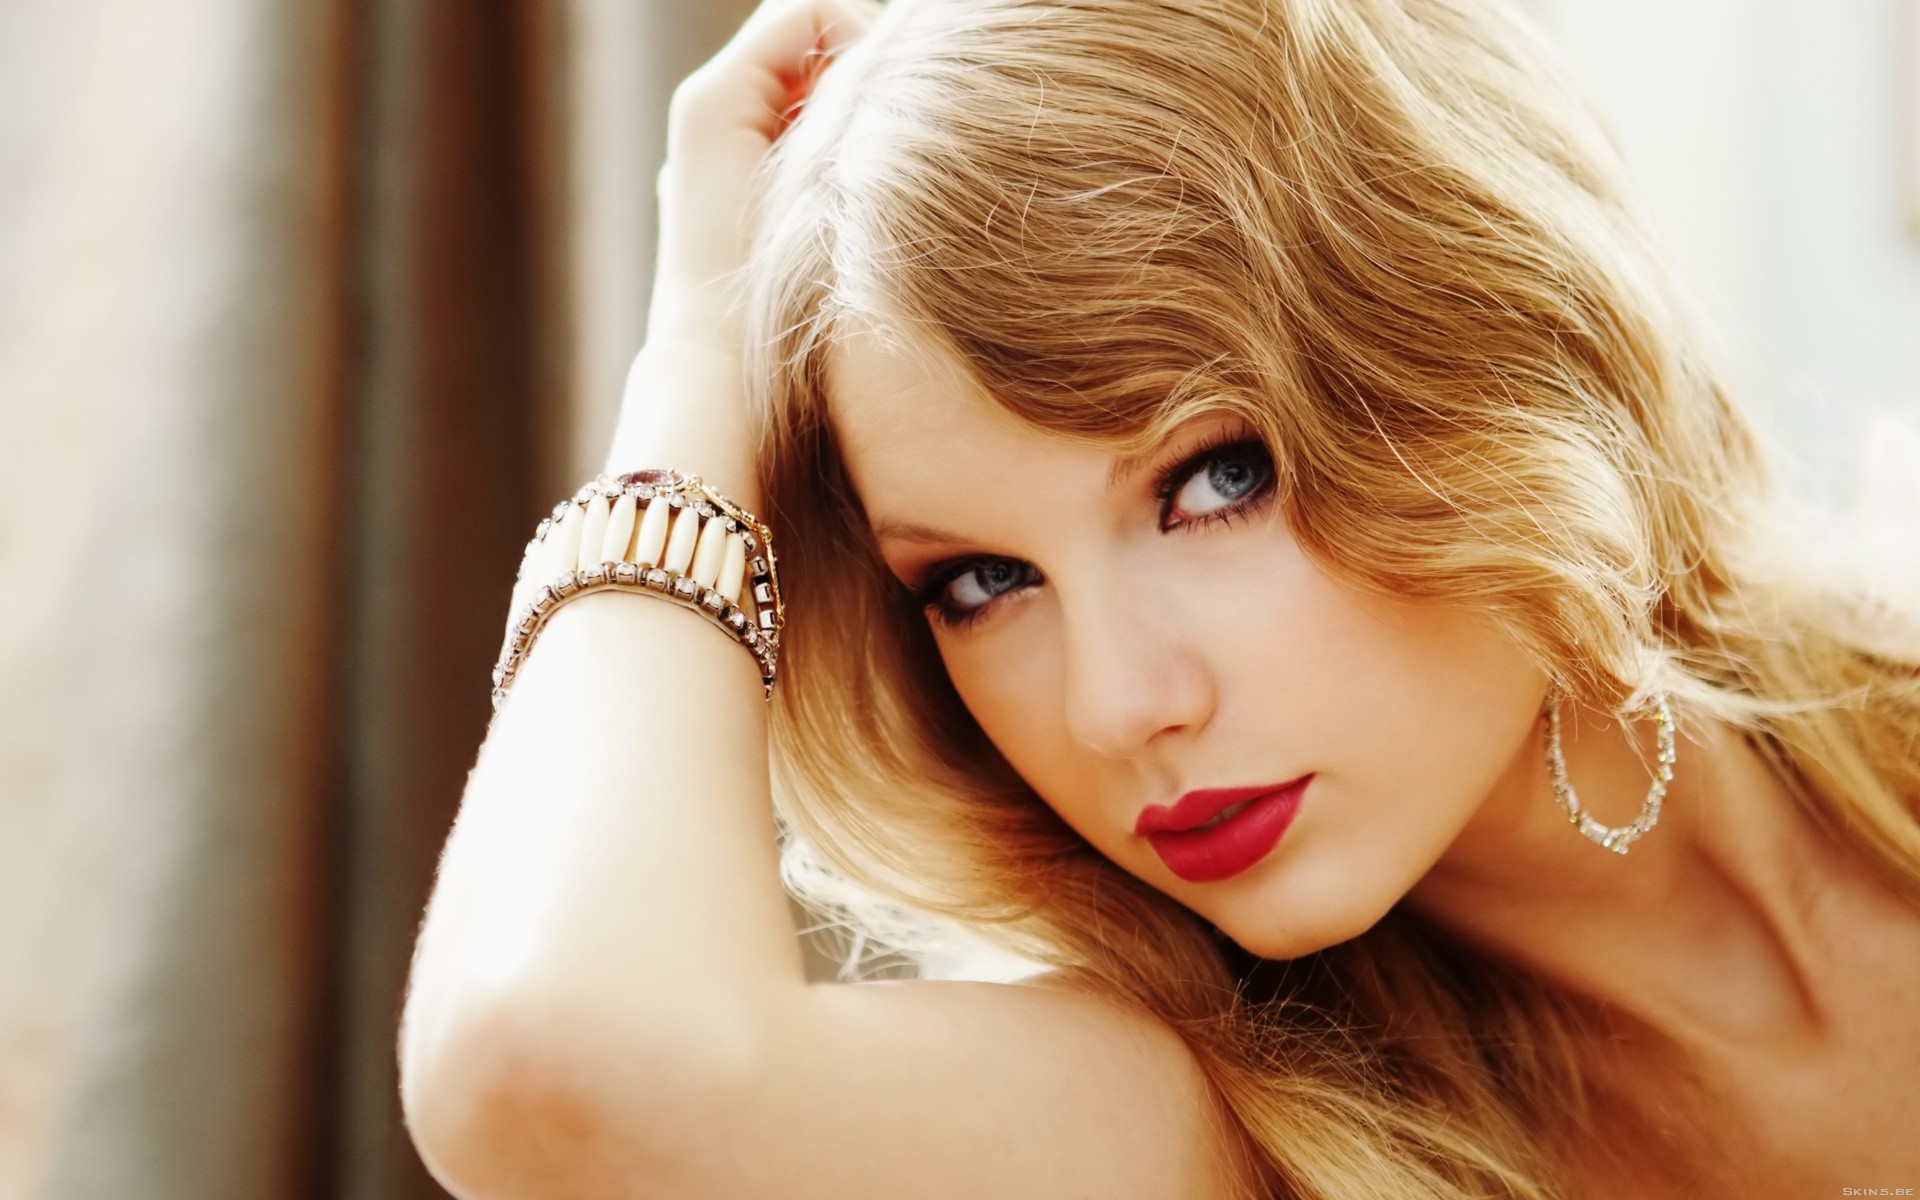 blondes, Women, Taylor, Swift, Celebrity, Singers, Faces, Red, Lips Wallpaper